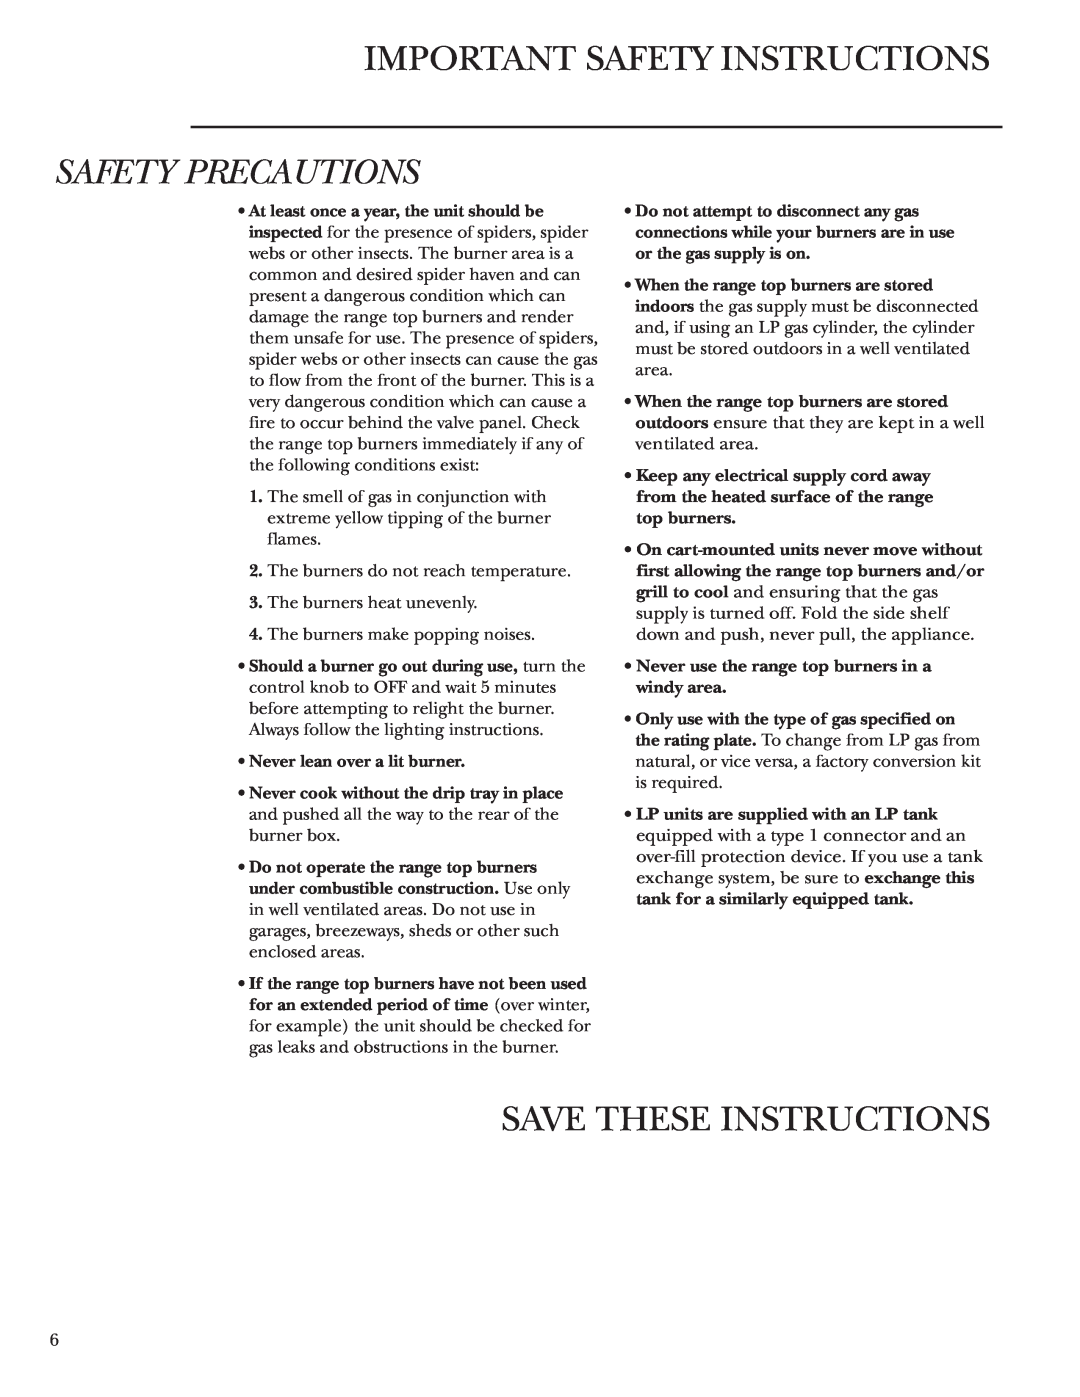 GE Monogram ZX2YSS owner manual Save These Instructions, Important Safety Instructions, Safety Precautions 